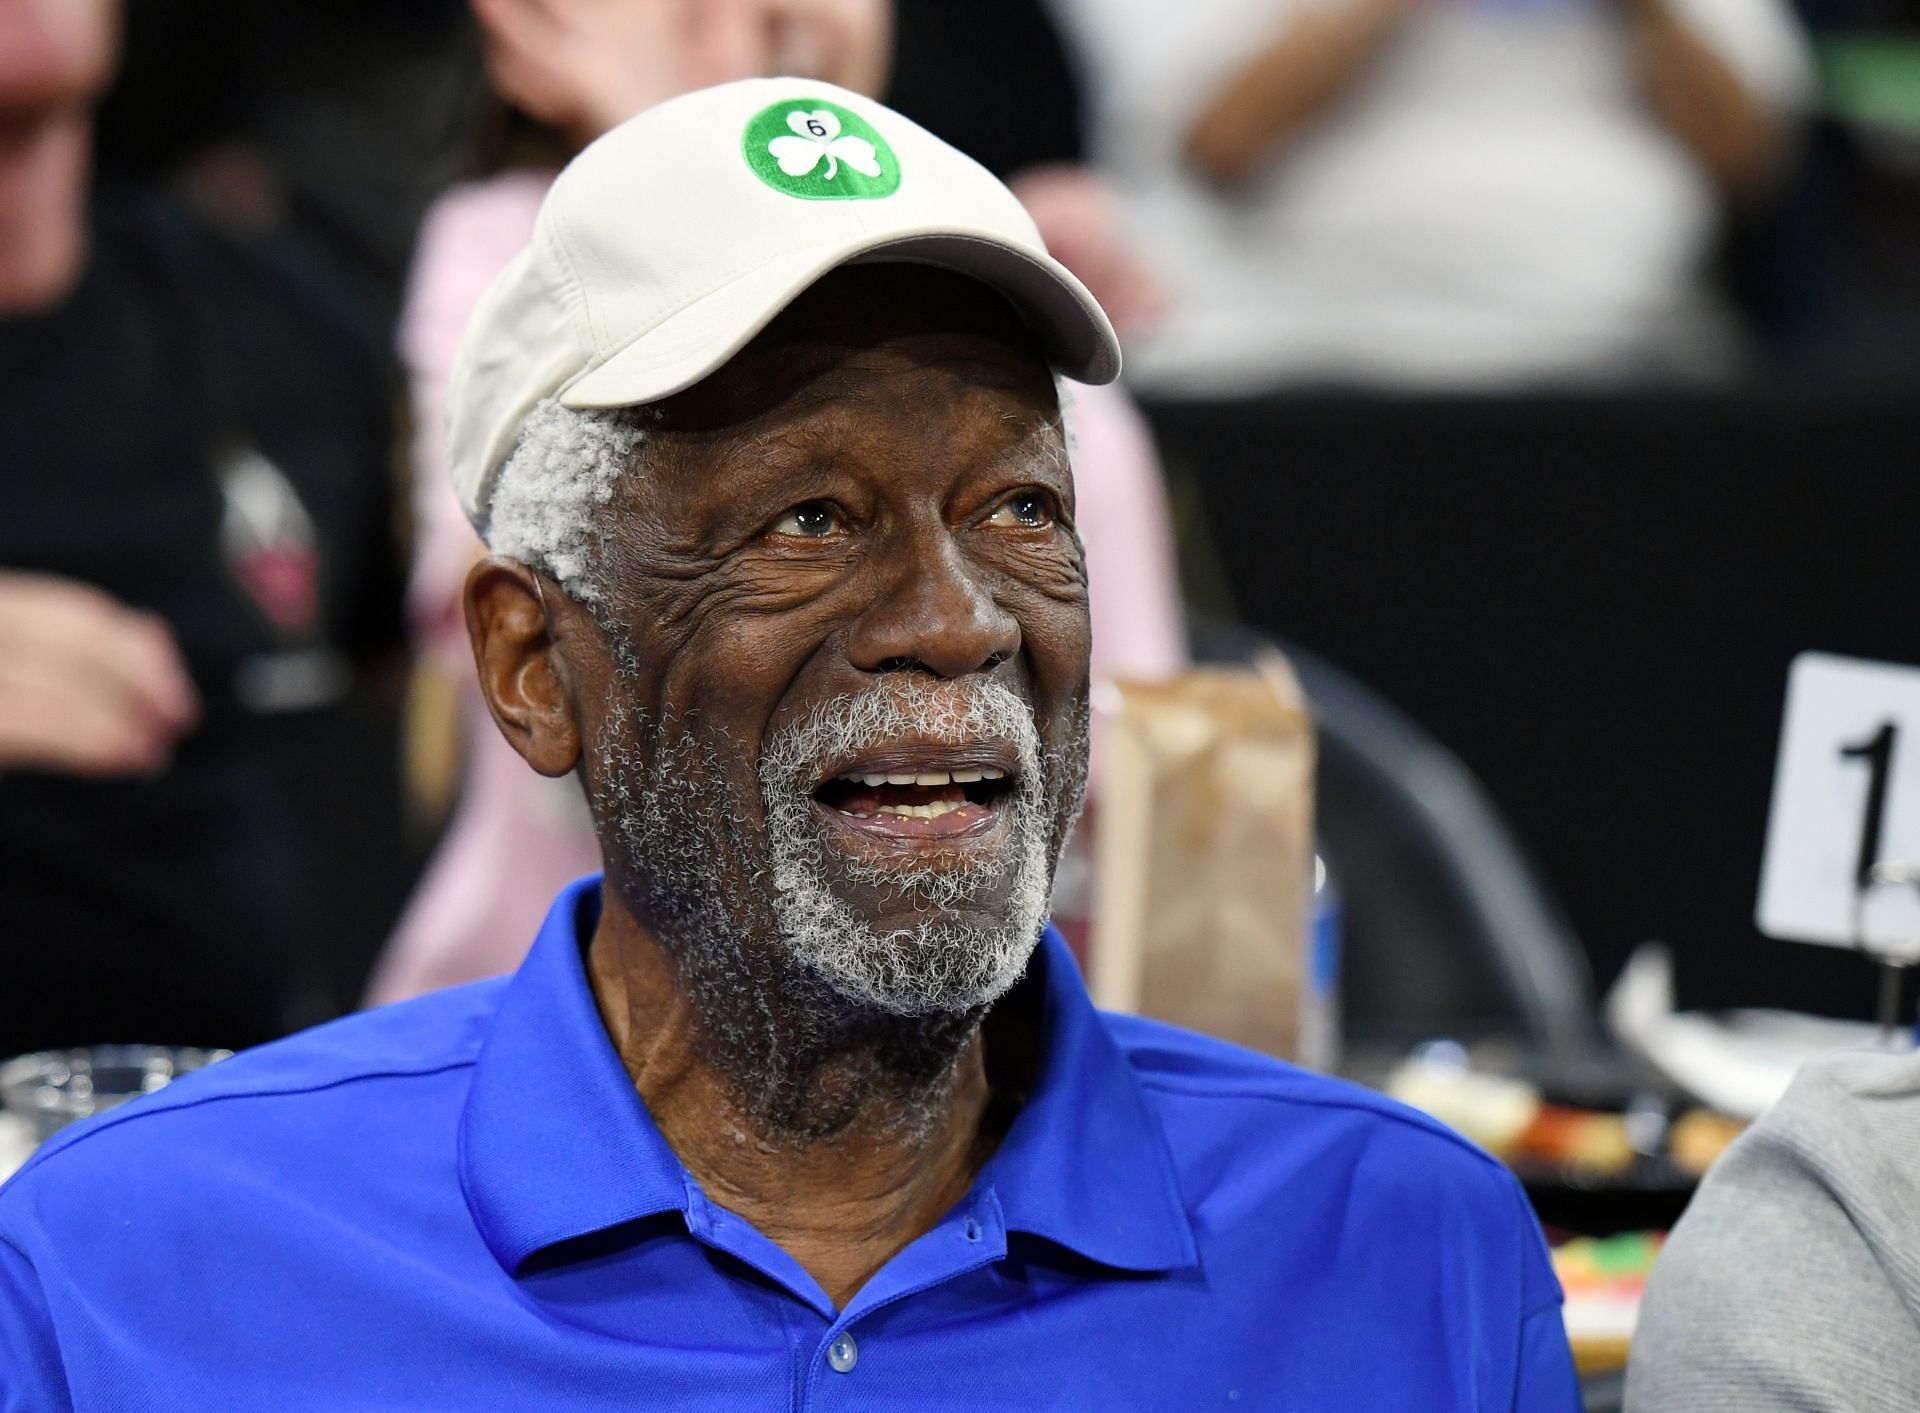 Bill Russell to receive lifetime achievement award at NBA Awards